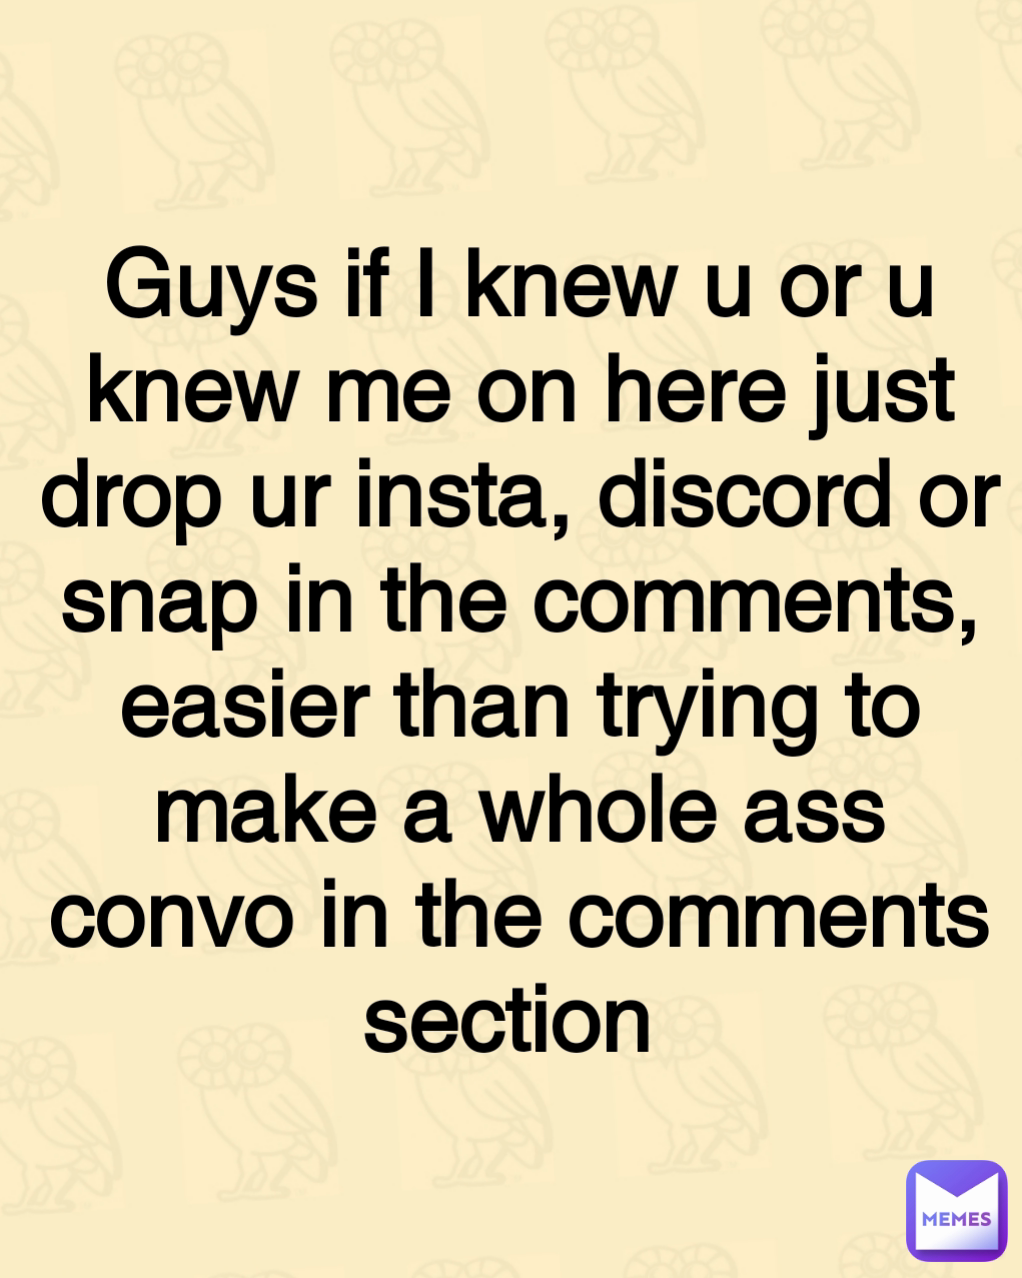 Guys if I knew u or u knew me on here just drop ur insta, discord or snap in the comments, easier than trying to make a whole ass convo in the comments section 